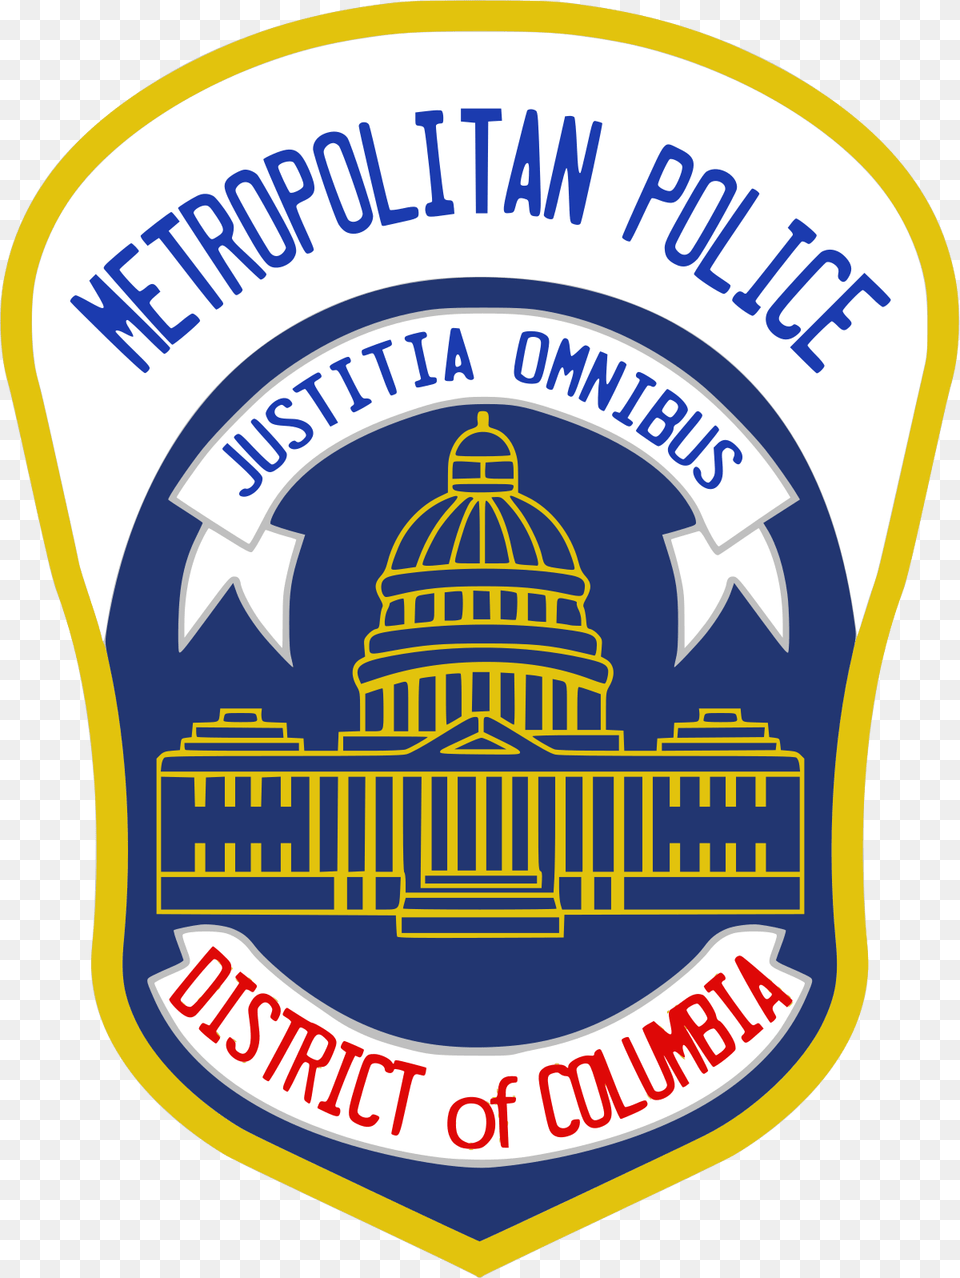 Metropolitan Police Department Of The District Of Columbia Malaysian Technical Cooperation Programme, Badge, Logo, Symbol Free Png Download